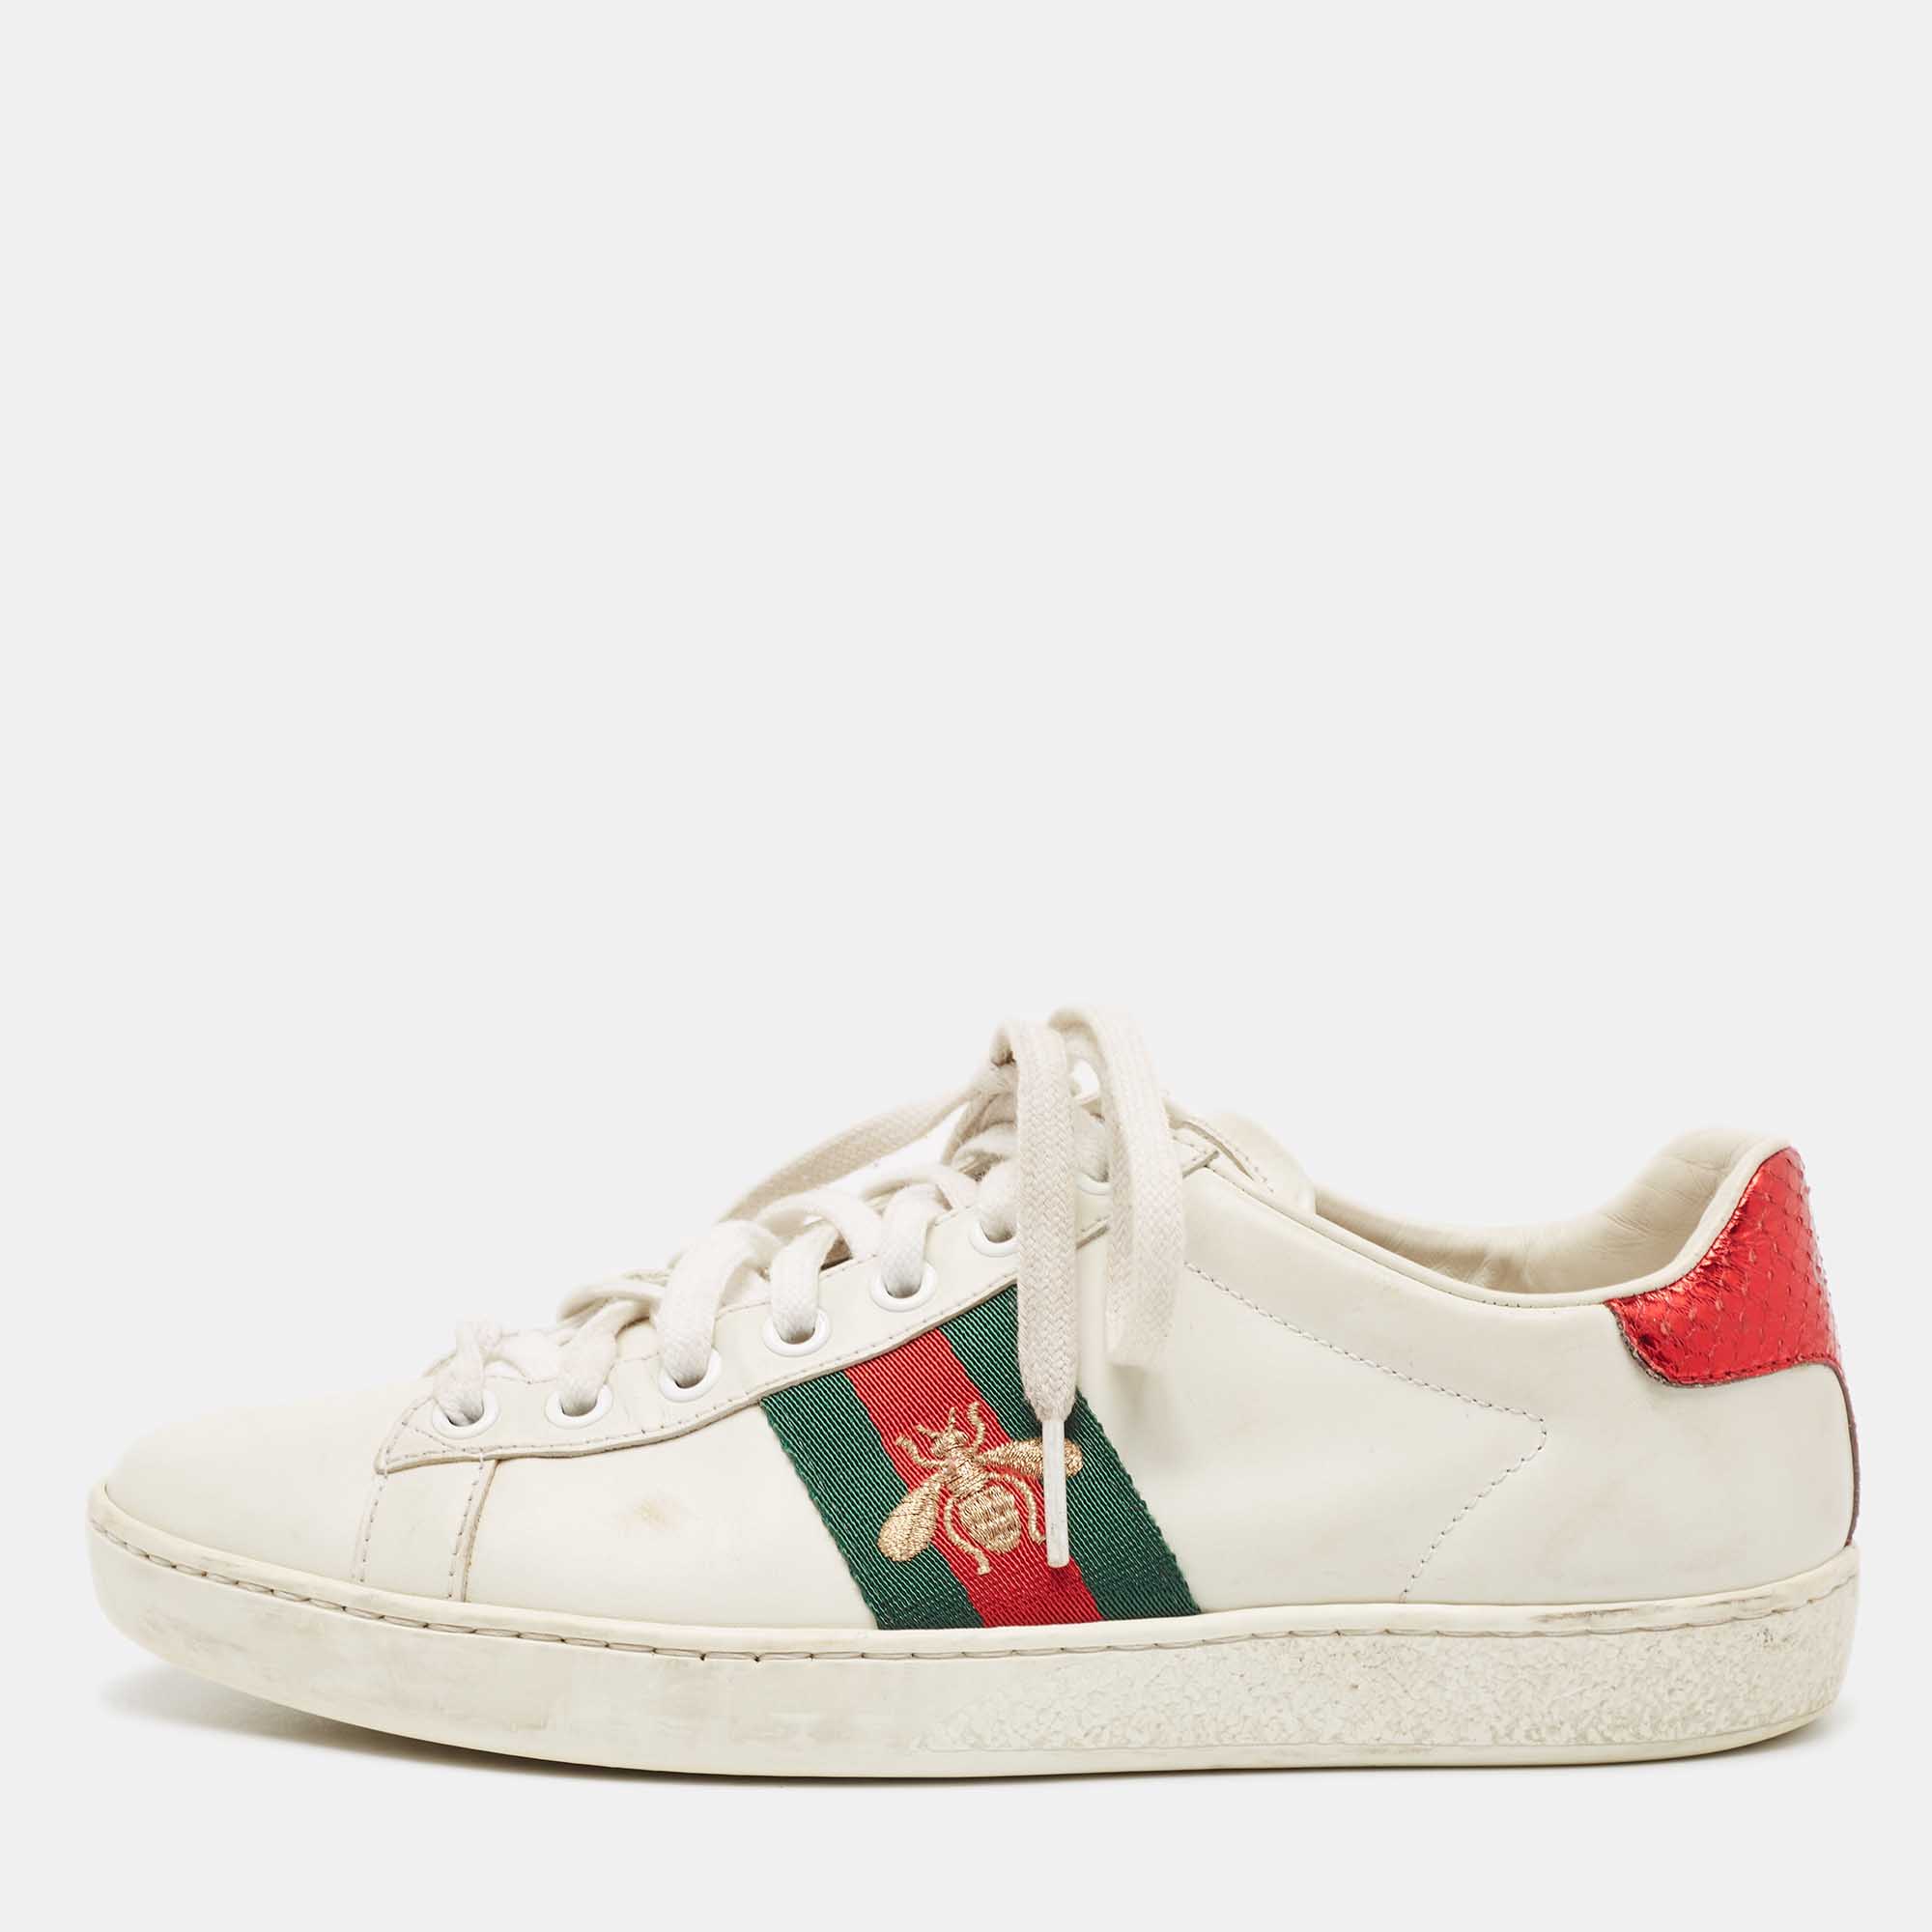 Stacked with signature details this Gucci pair is rendered from leather on the exterior and these shoes have been fashioned with iconic web stripes along with a bee motif on the sides. Complete with brand detailing on the back these shoes can be easily coordinated with your casuals.